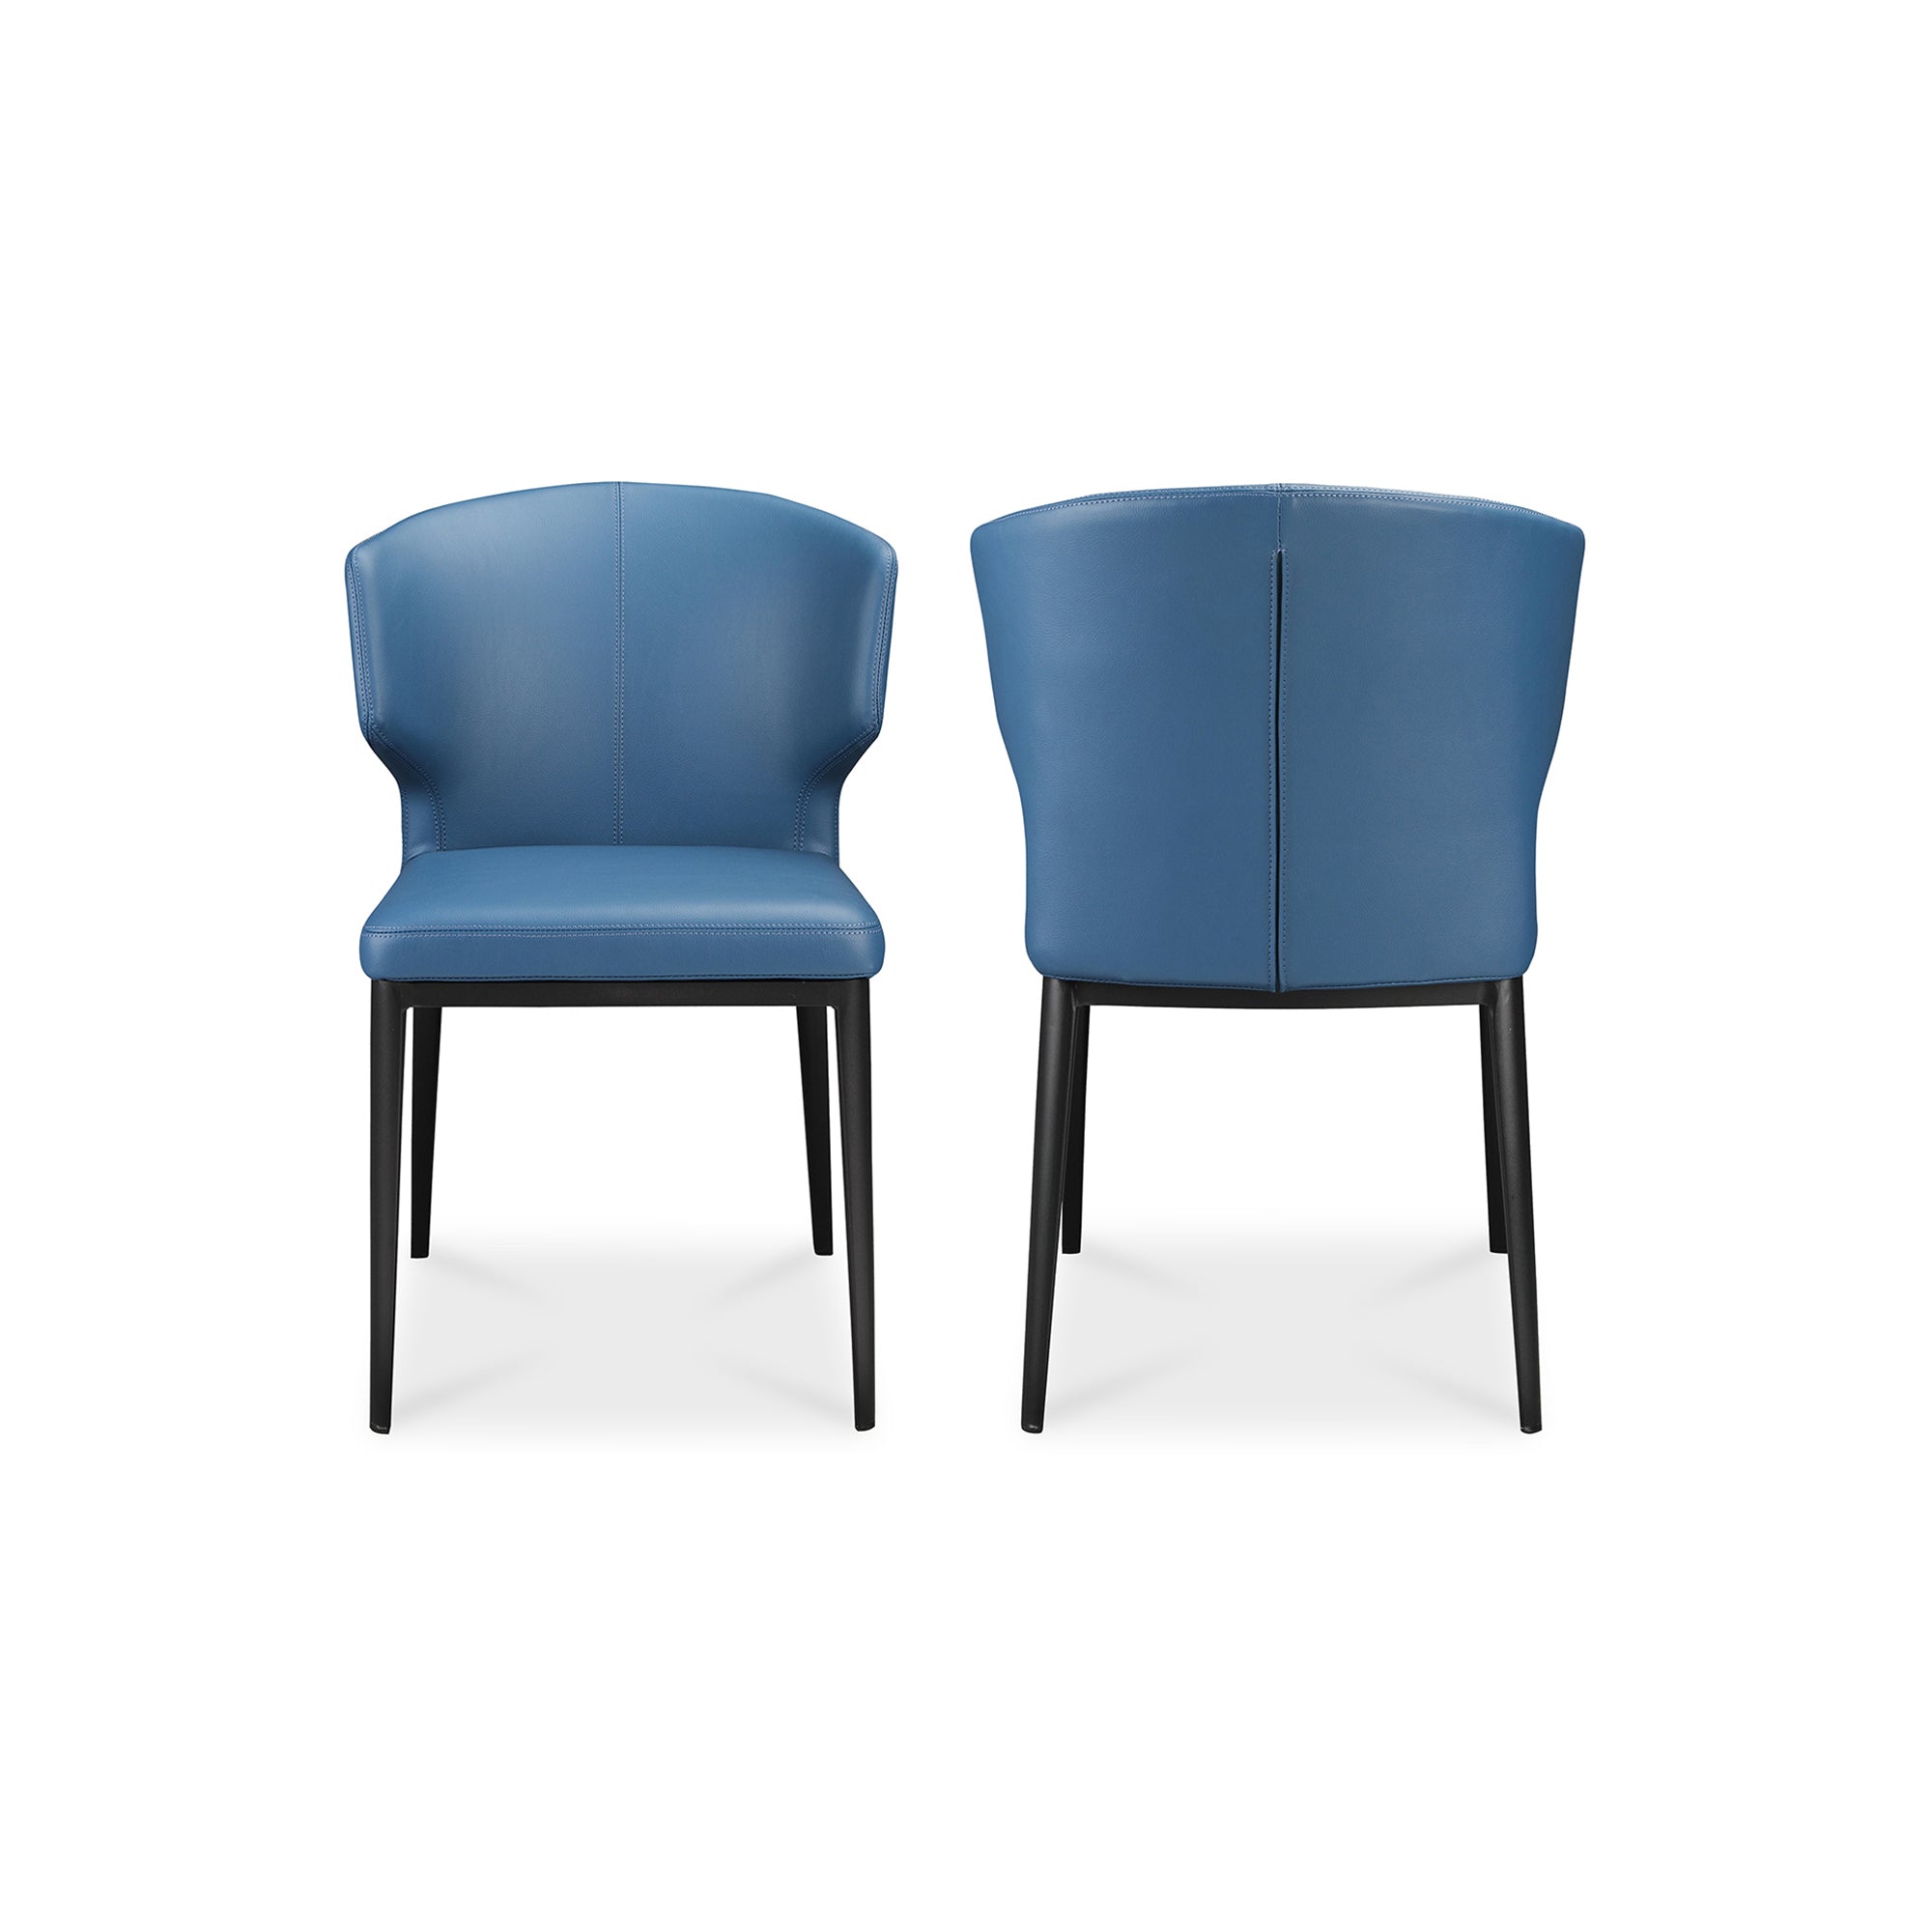 Delaney Dining Chair Sky Blue - Set Of Two